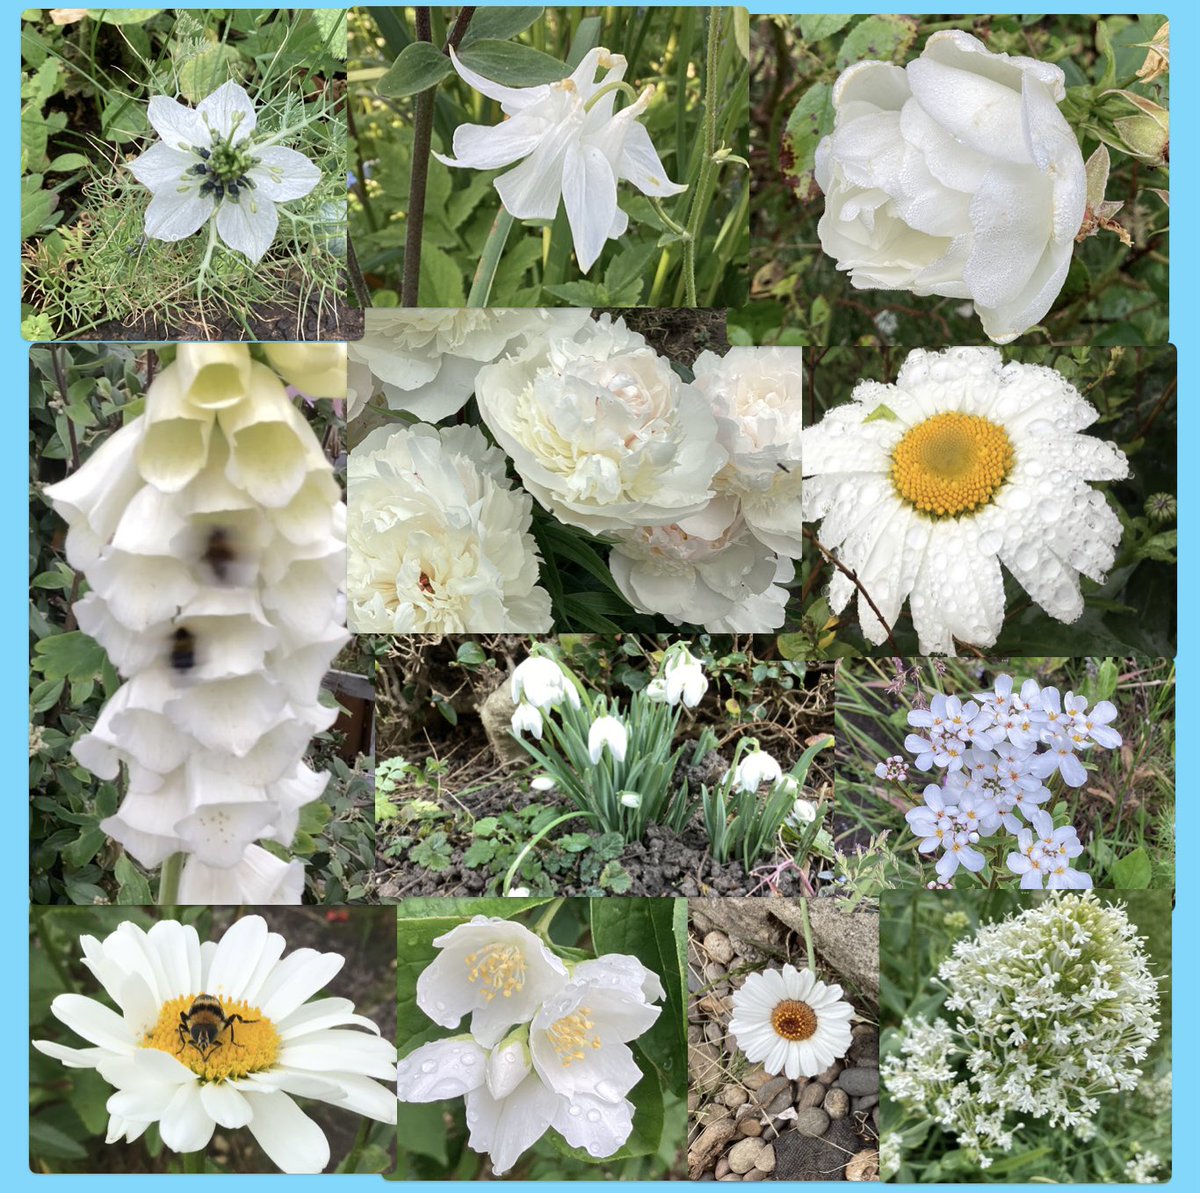 #GoodMorningEveryone  have the best one you can. We’re going all white today.  All from 2023 hoping the same 2024 🥰 #AllWhite  #FlowersOfTwitter  #FlowersOnFriday  #FridayFunDay